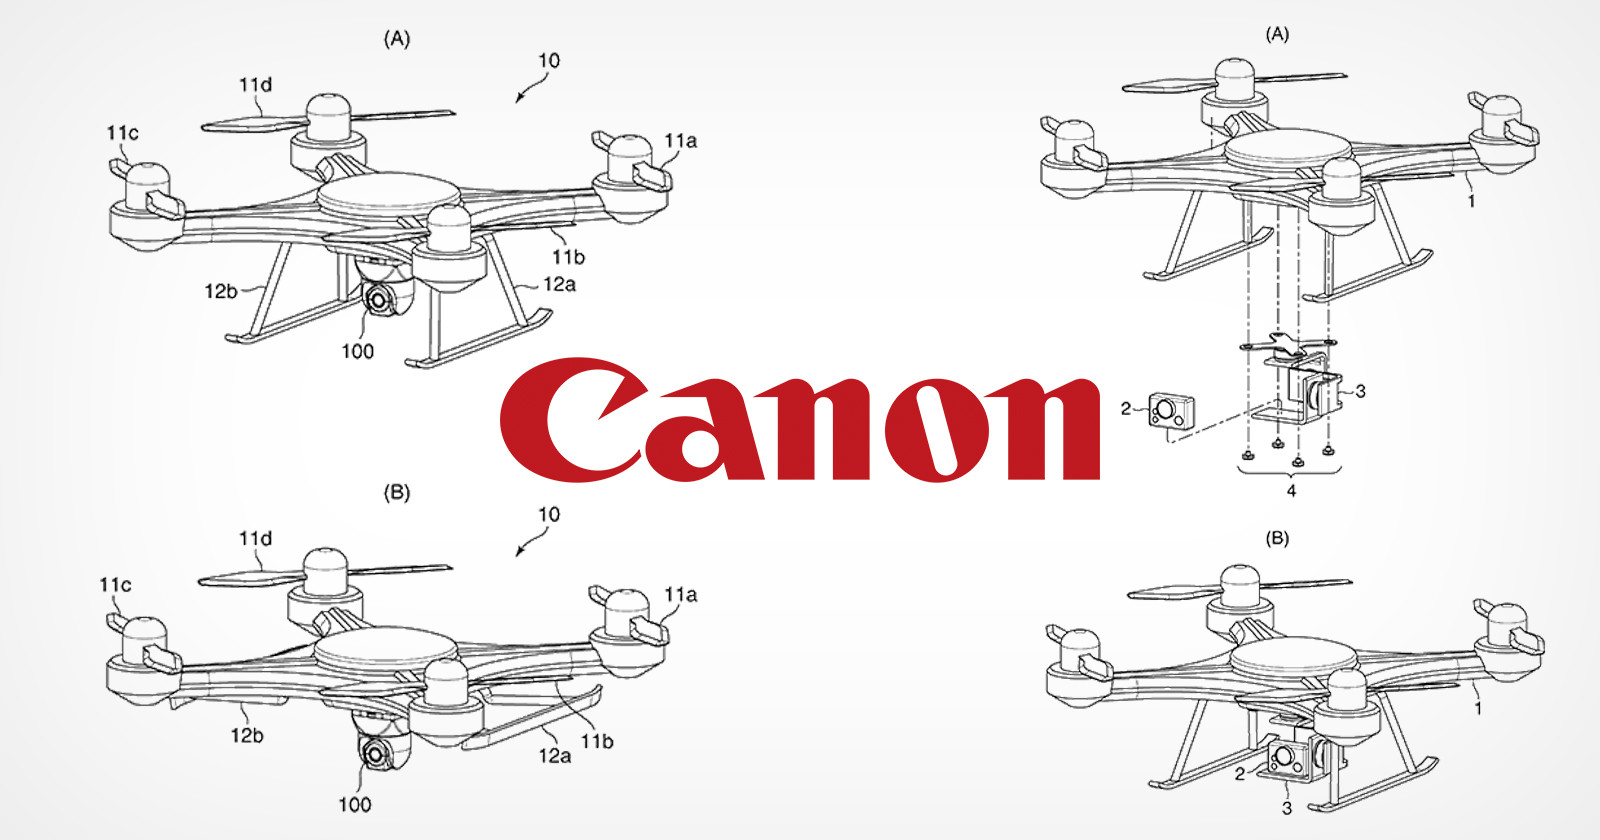  canon has designed gimbal system consumer-level drones 